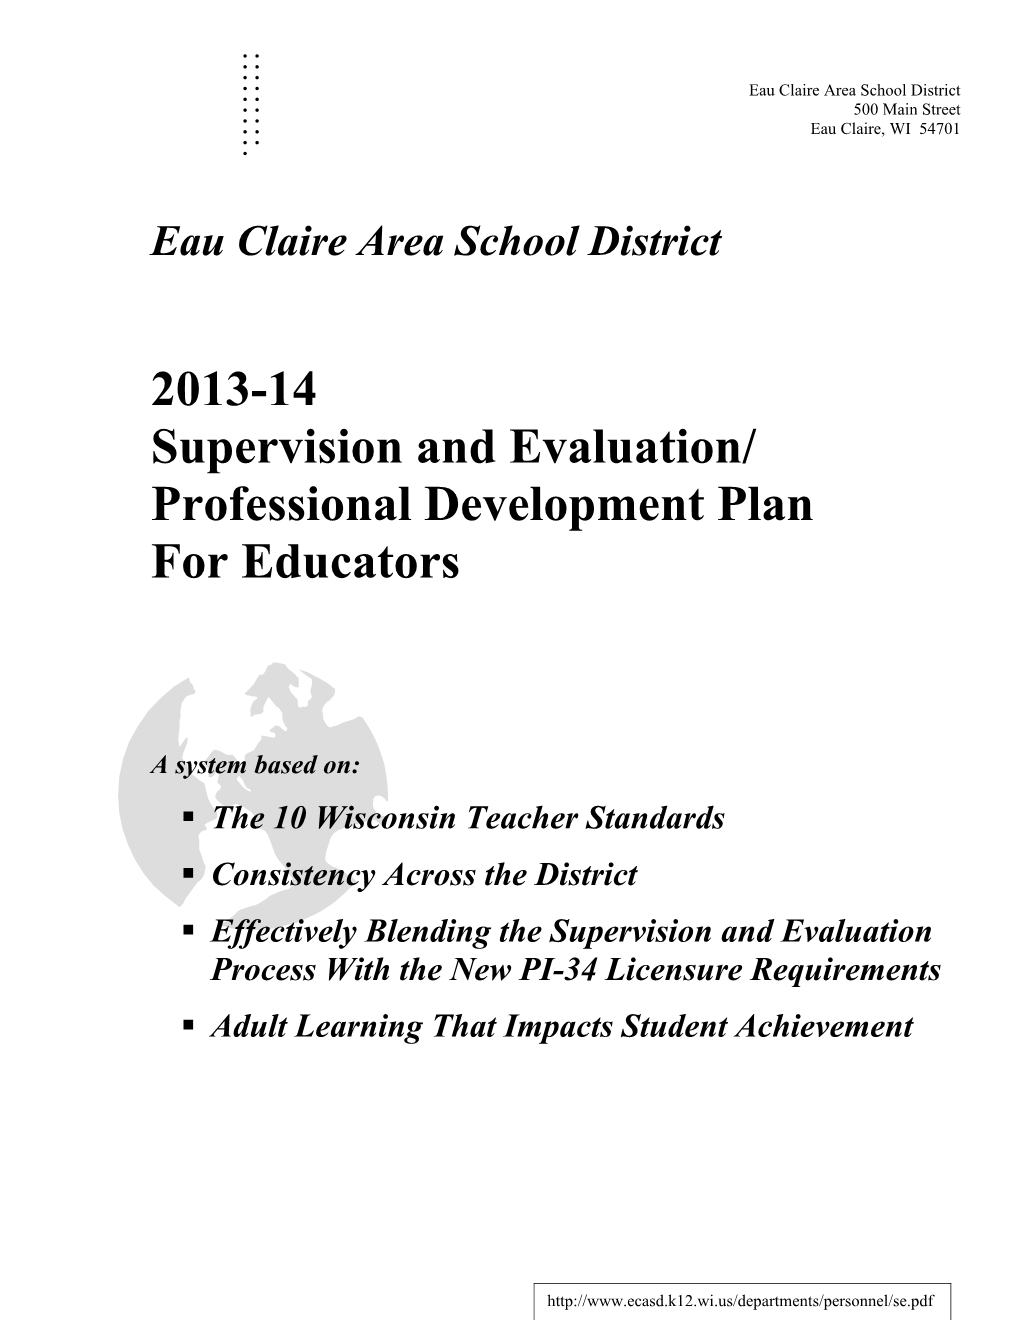 Supervision and Evaluation/ Professional Development Plan